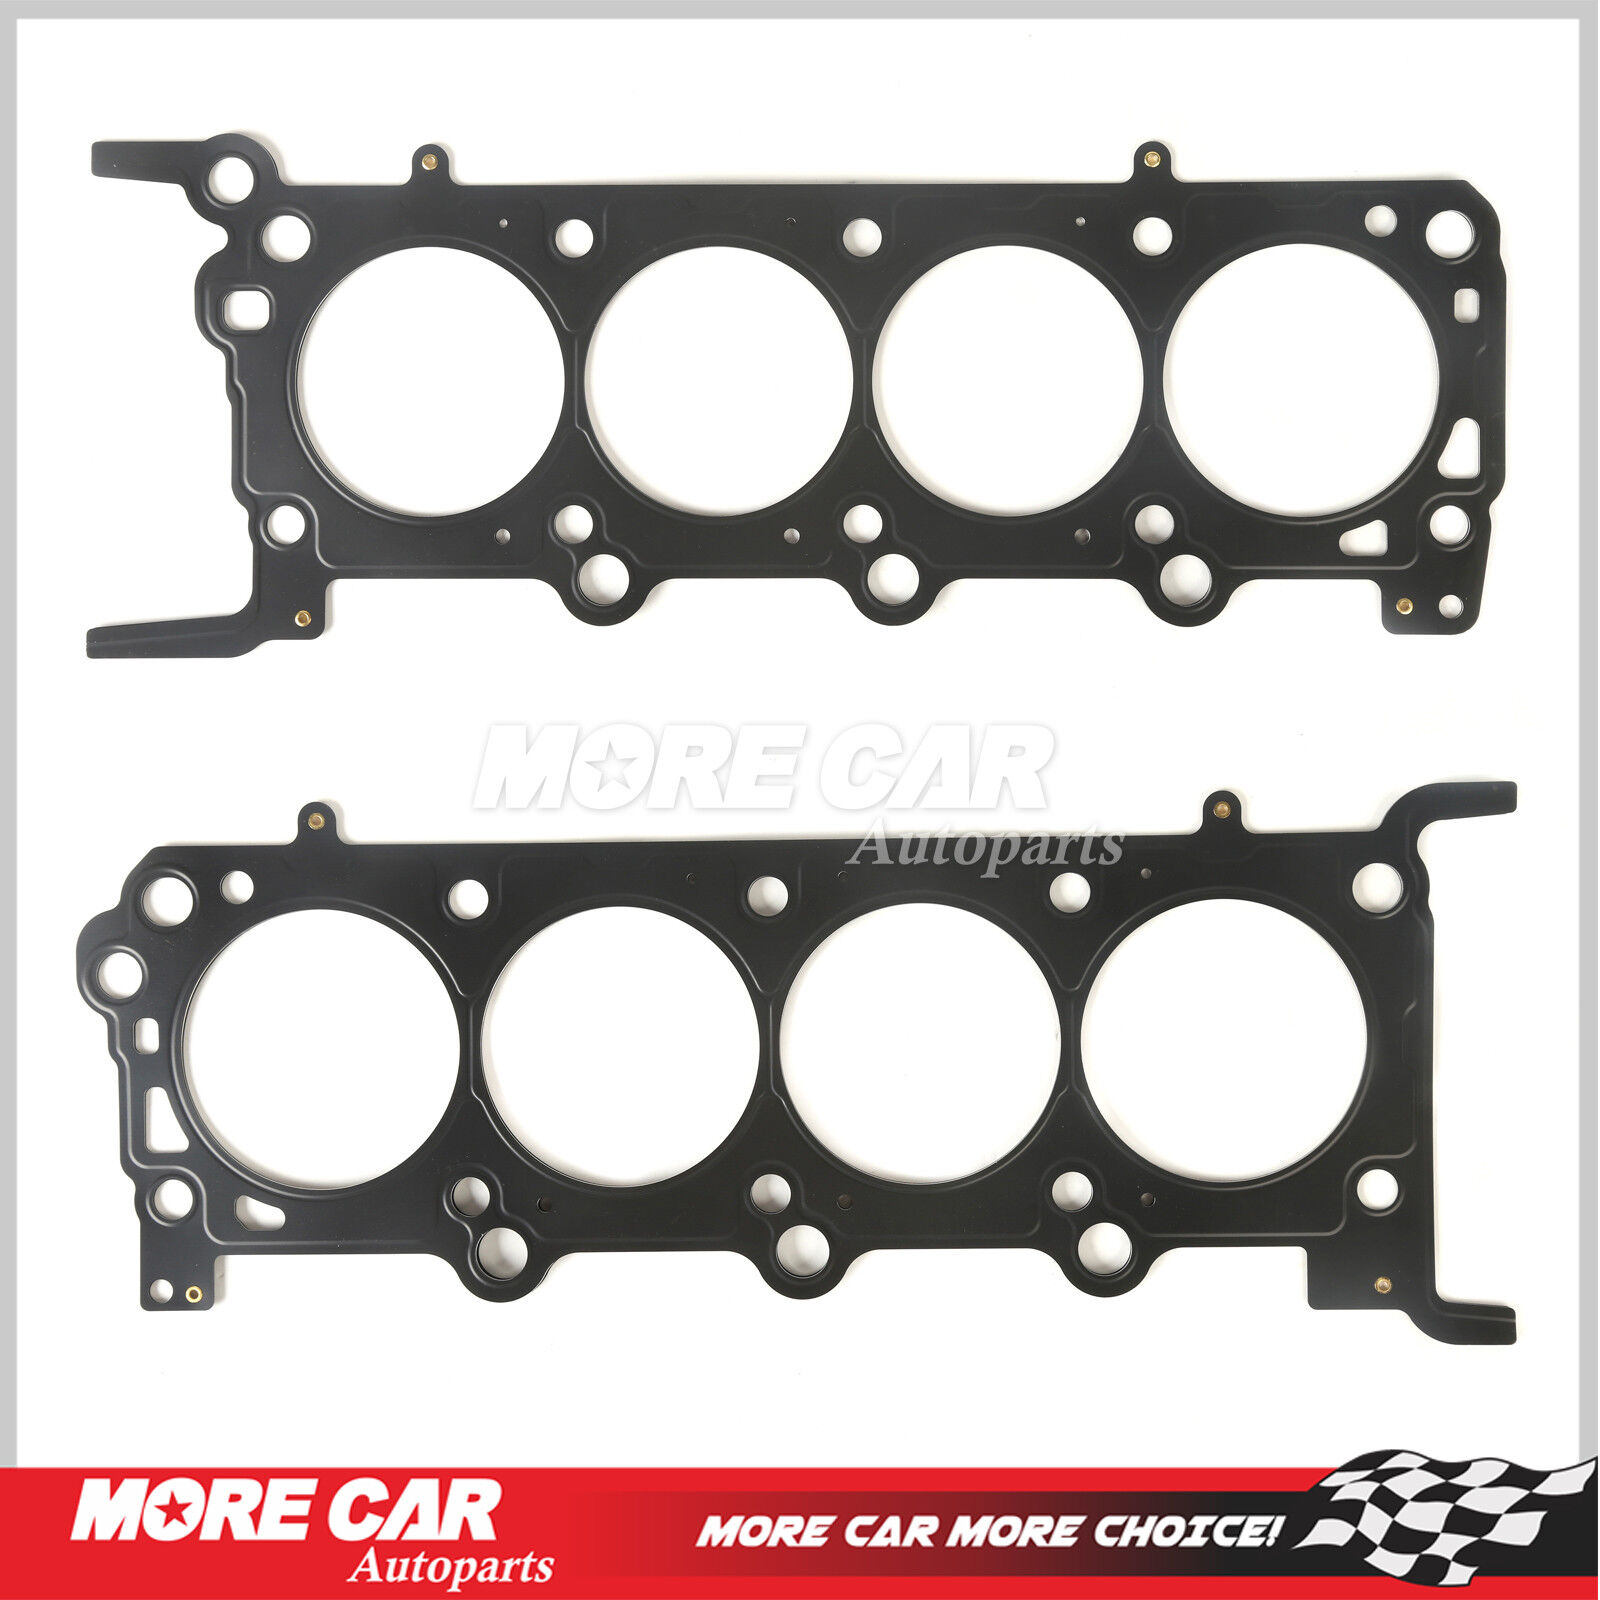 Head Gasket Left & Right Fit 04-14 Ford Expedition Explorer F150 F250 4.6L 5.4L